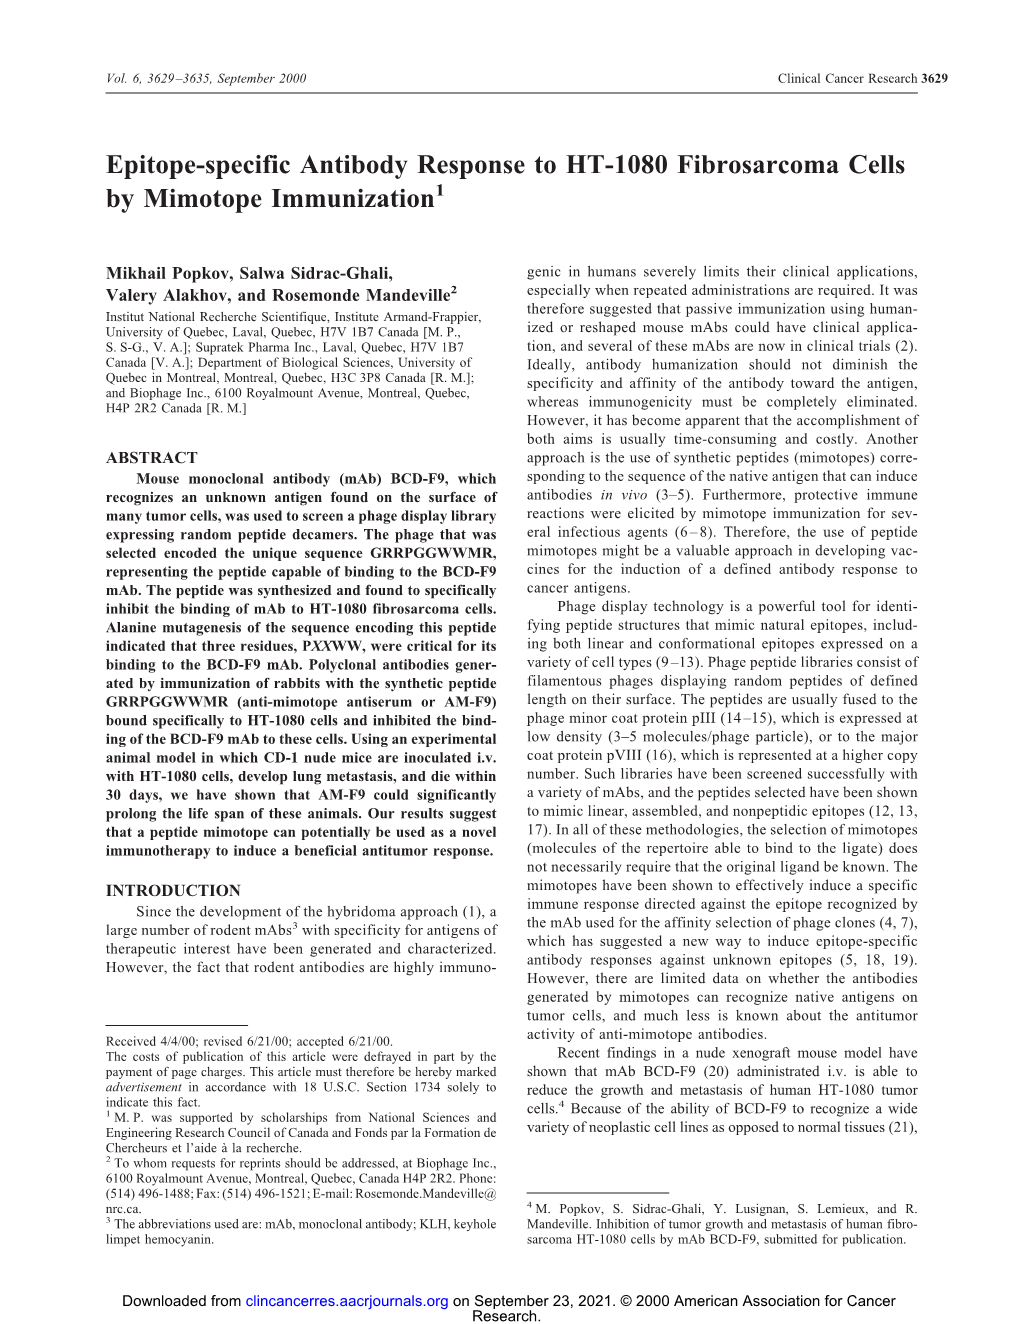 Epitope-Specific Antibody Response to HT-1080 Fibrosarcoma Cells by Mimotope Immunization1